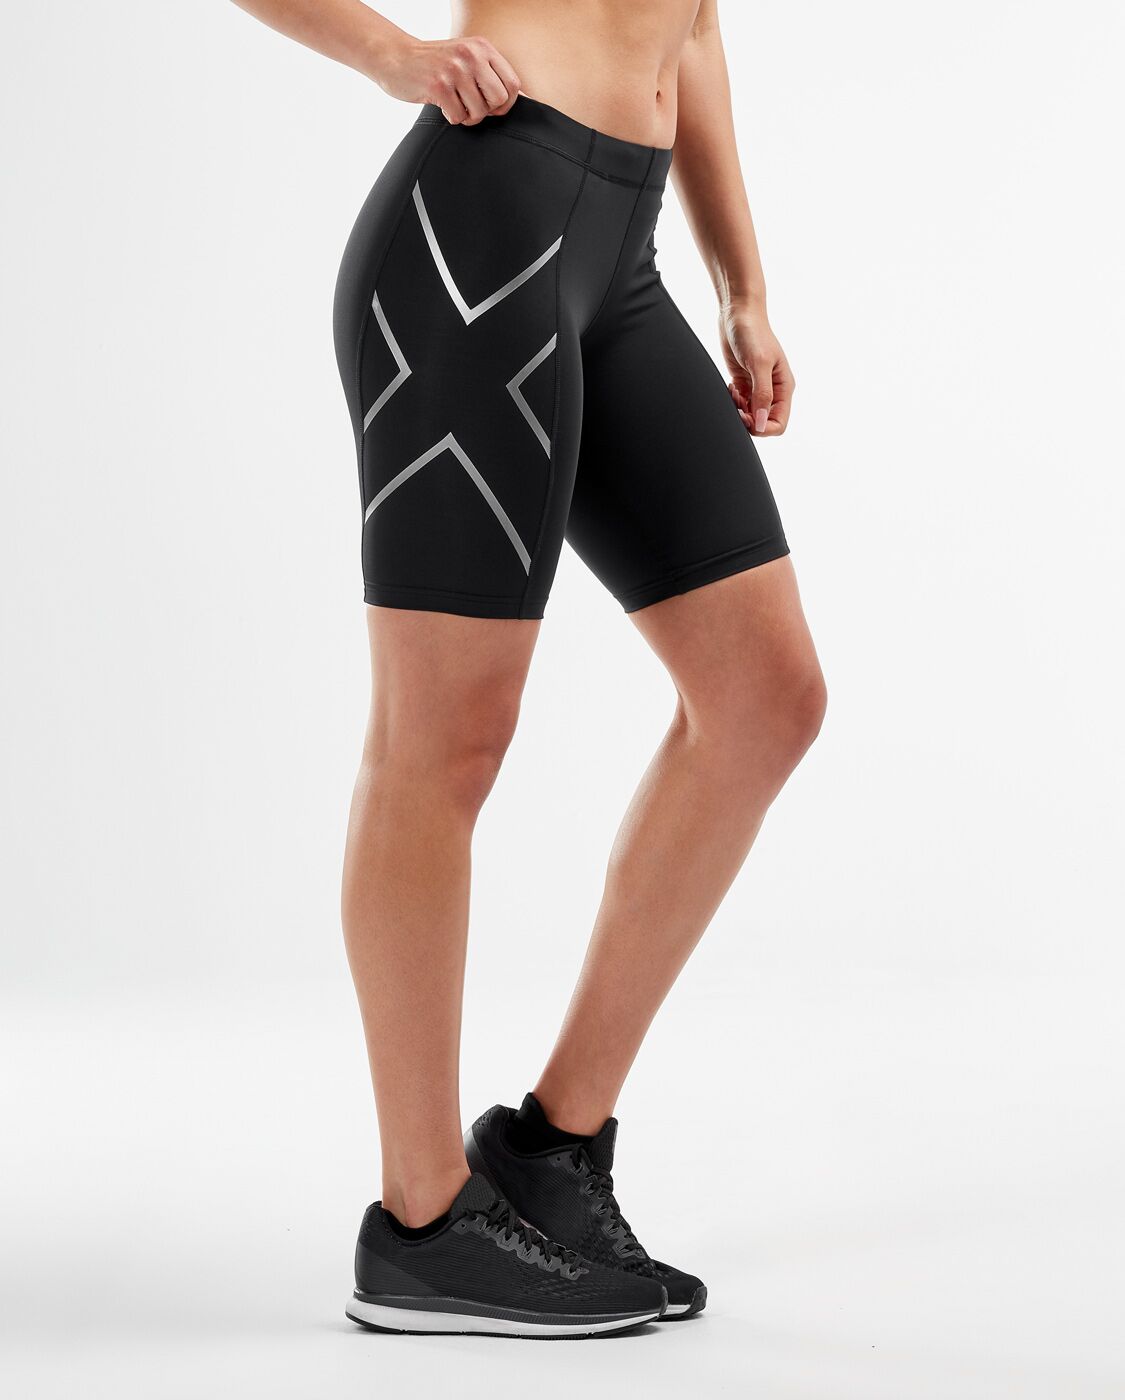 2XU Women's Vented Compression Top - Eastern Mountain Sports